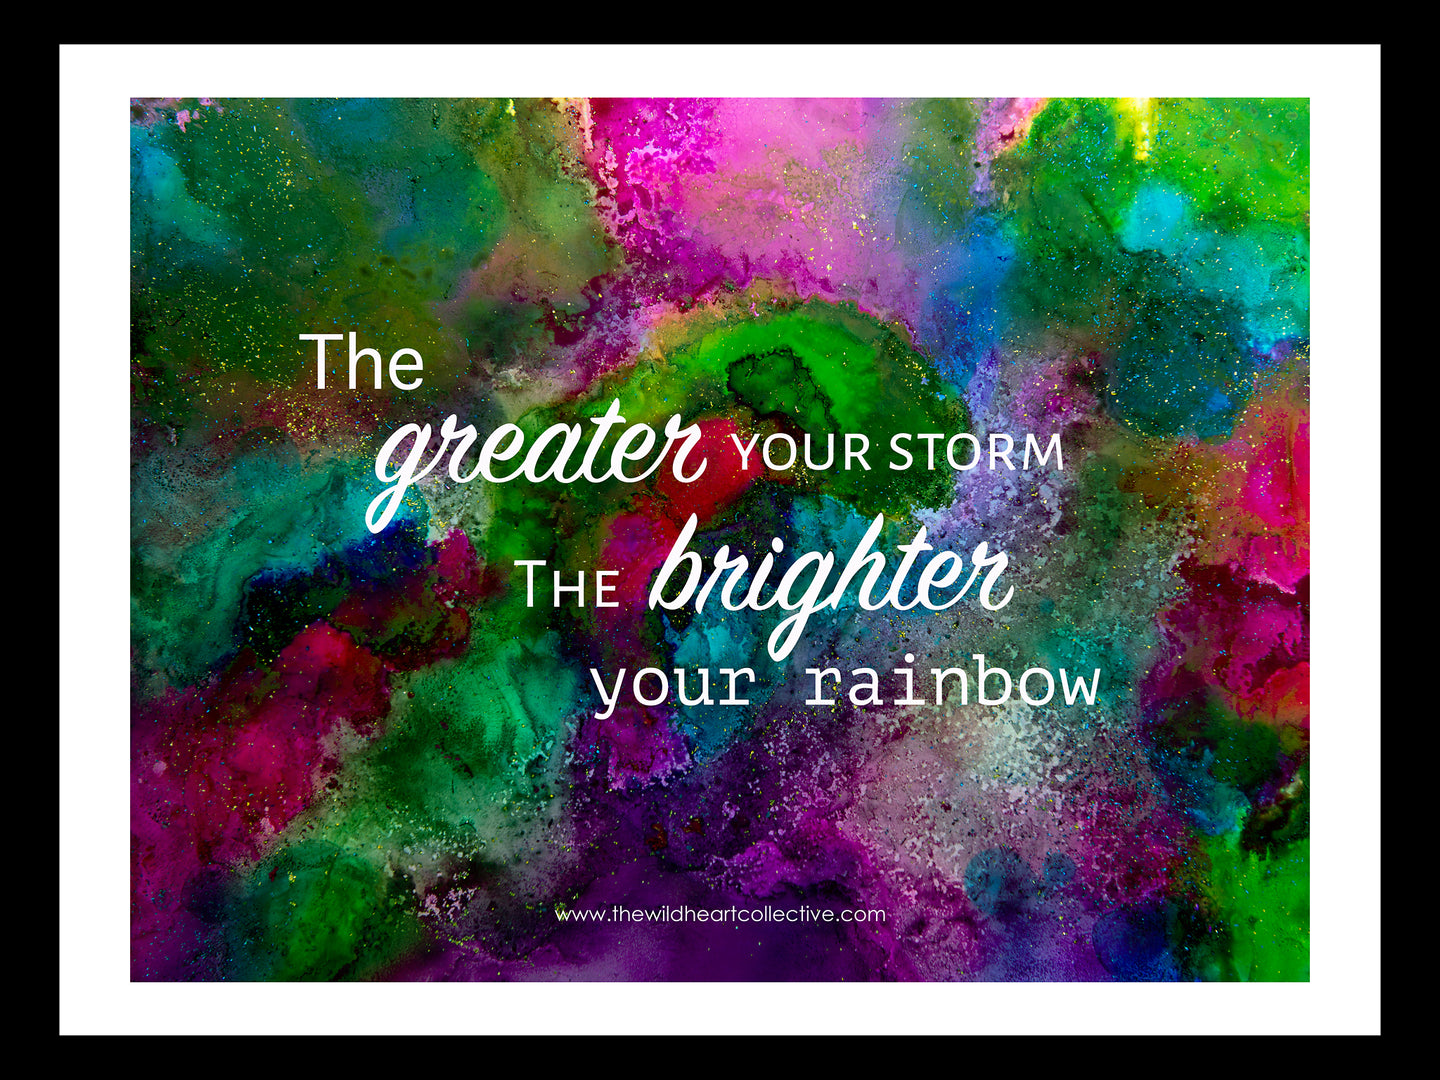 Custom Design: The Greater Your Storm, The Brighter Your Rainbow (Inspirational Quote)